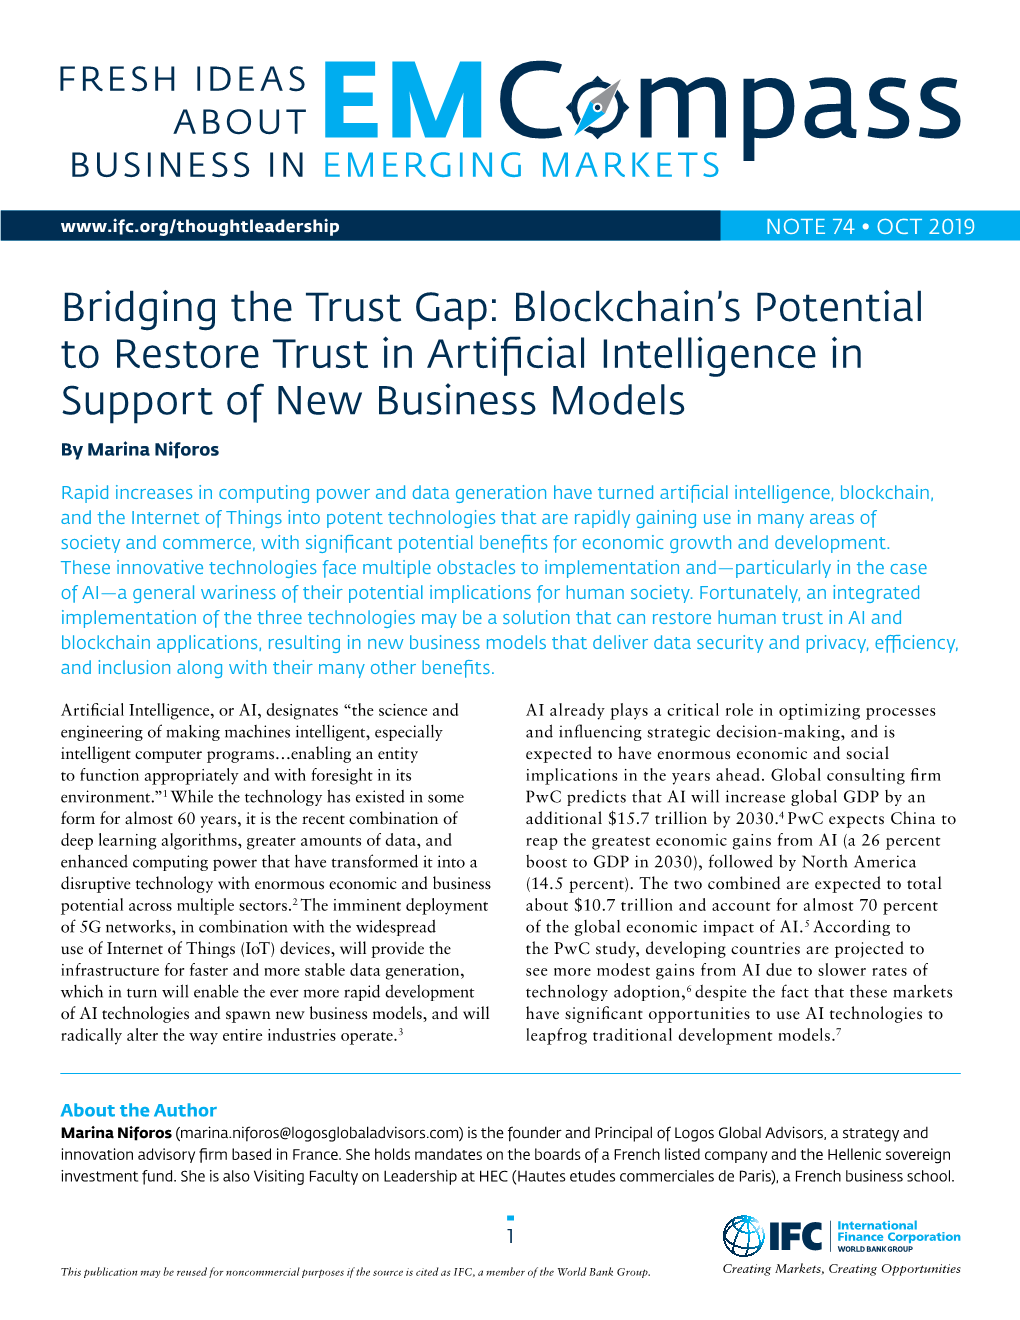 Blockchain's Potential to Restore Trust in Artificial Intelligence In